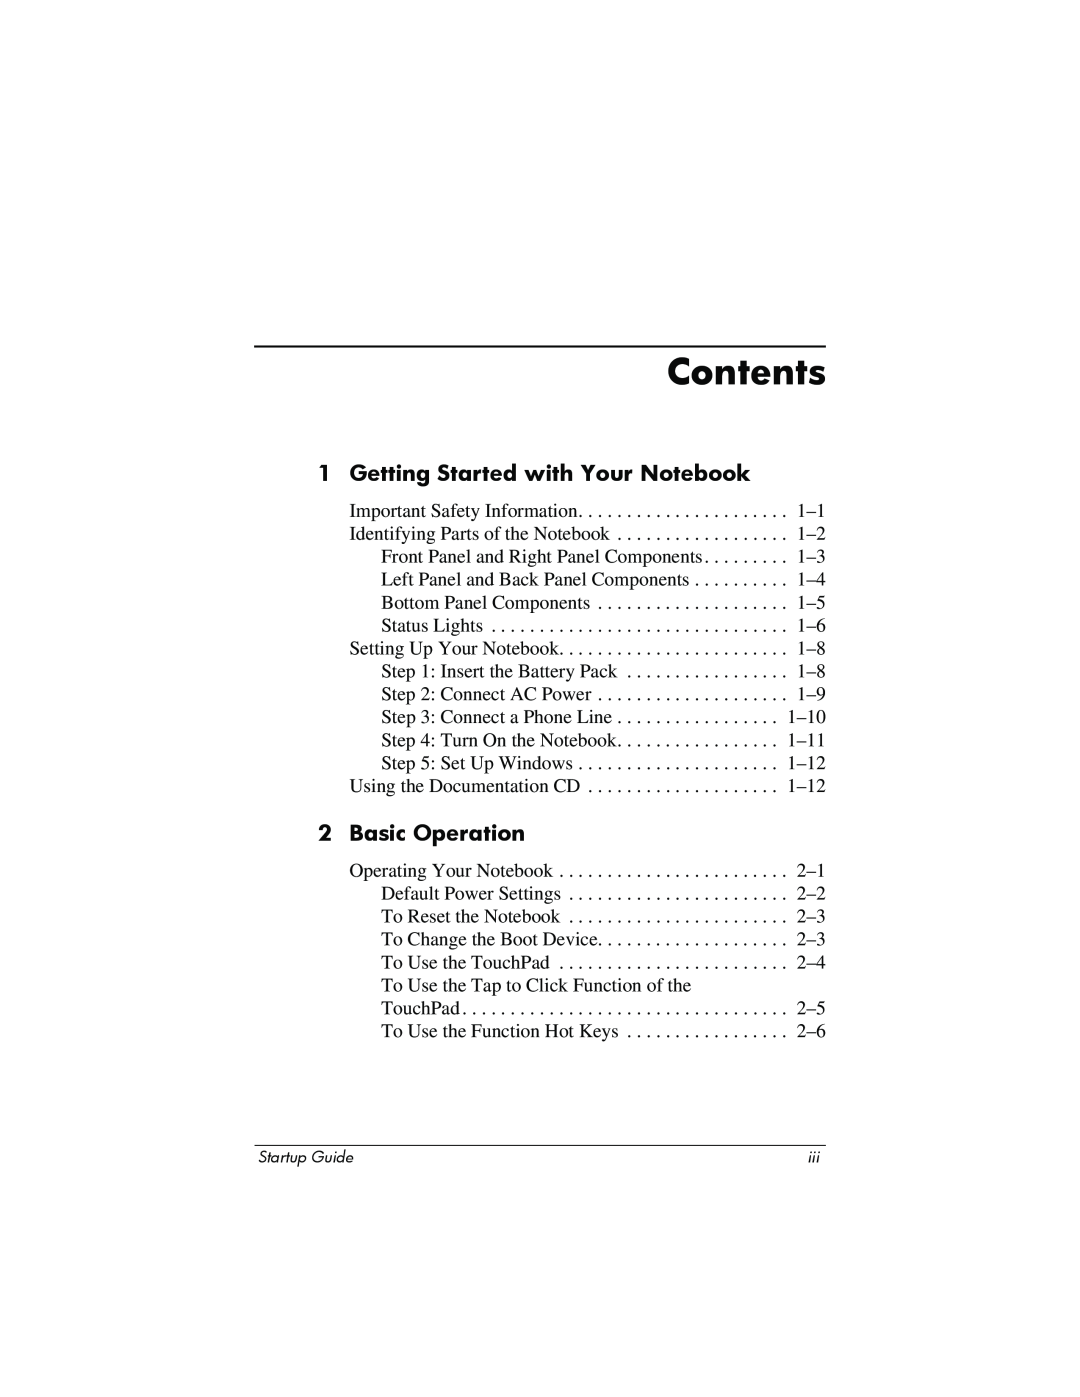 Compaq Personal Computer manual Contents, Getting Started with Your Notebook, Basic Operation 